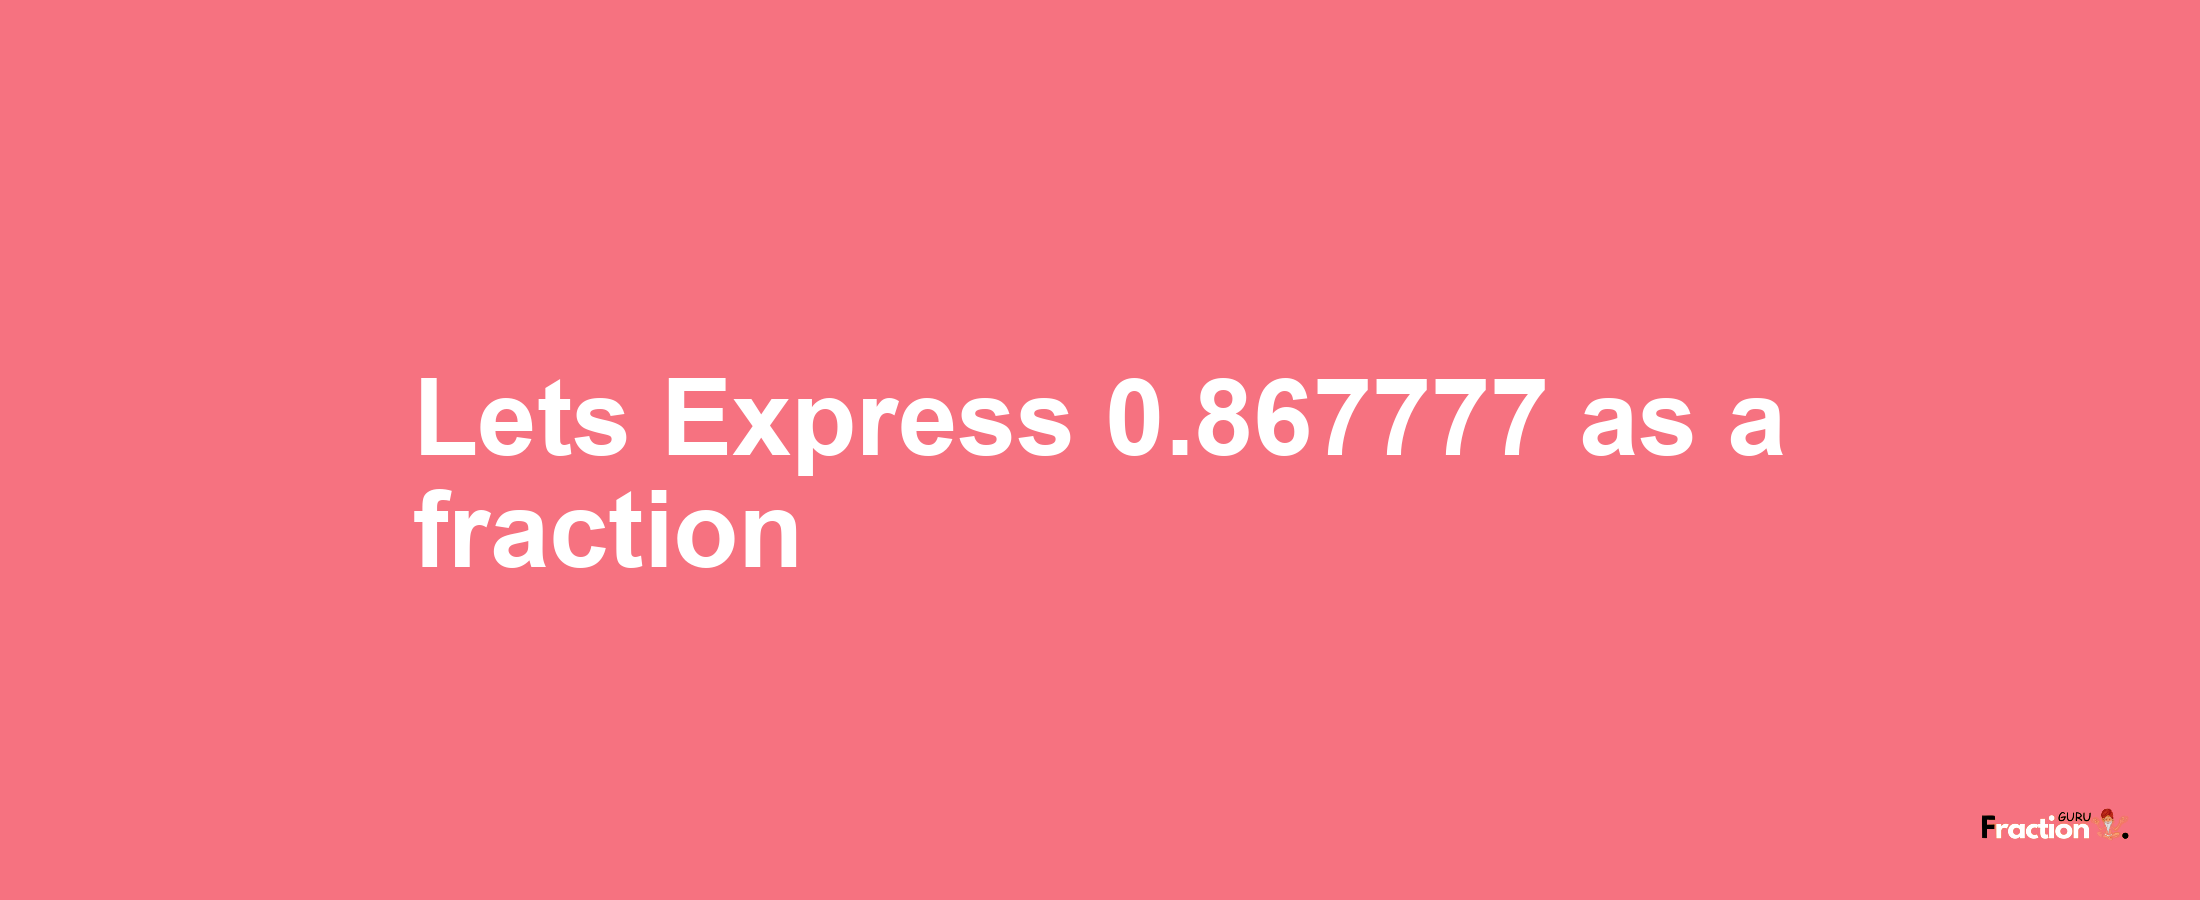 Lets Express 0.867777 as afraction